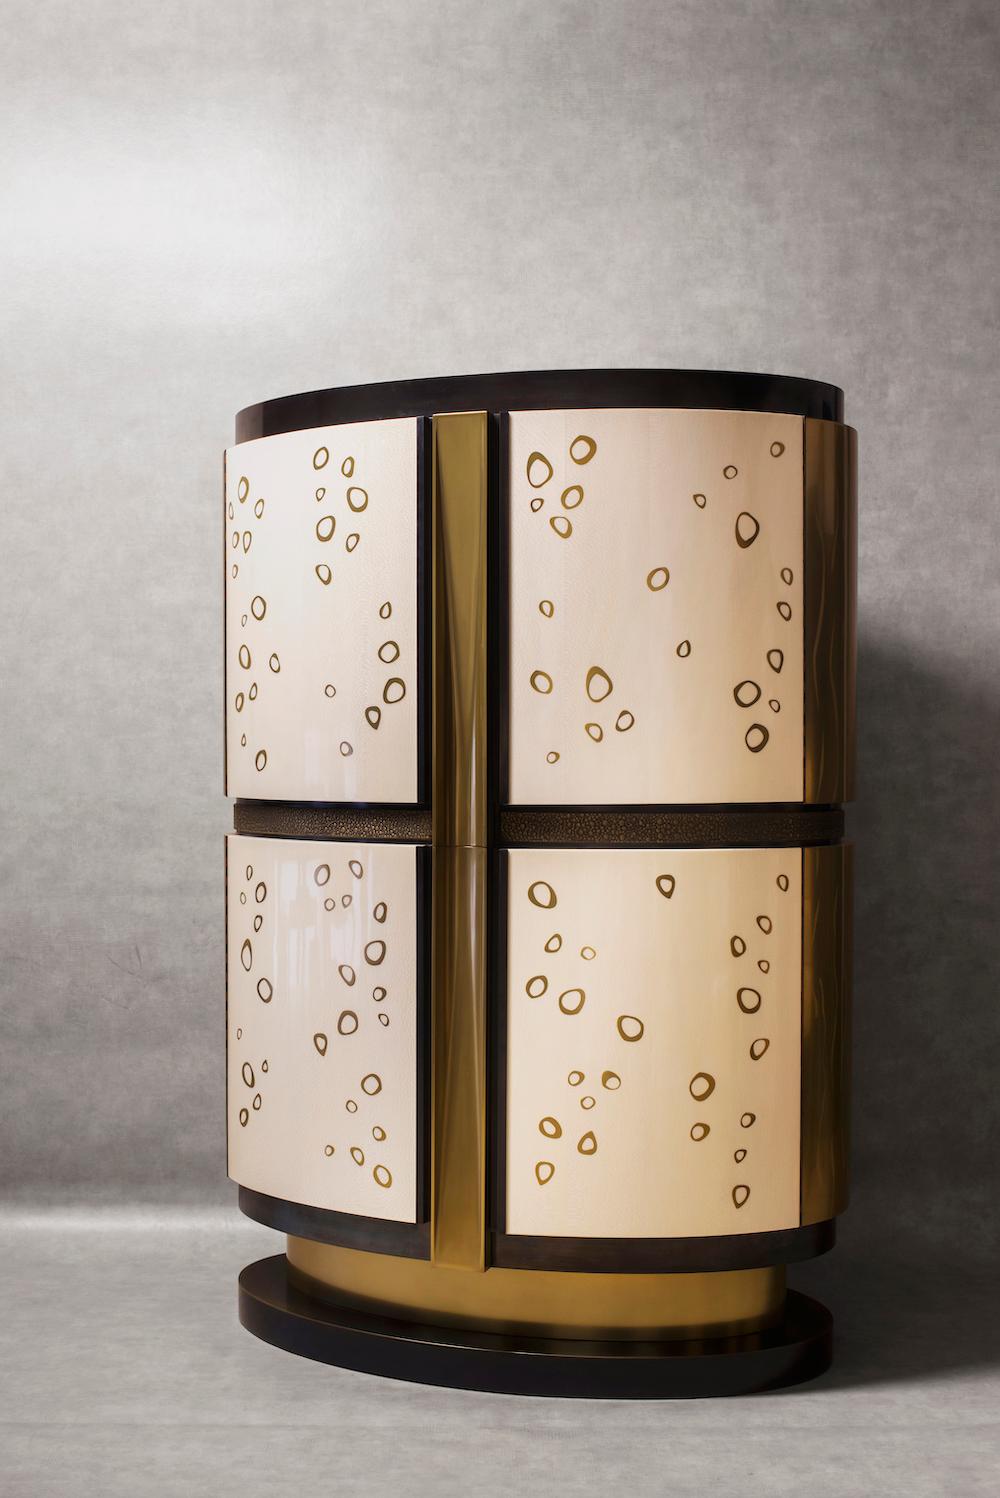 Frédérique Domergue has poured all her craftsmanship into the creation of this one-of-a-kind piece, which was first presented at the prestigious Révélations show in Paris in 2019.
The cylindrical, multi-purpose cabinet (It can be used as a bar or